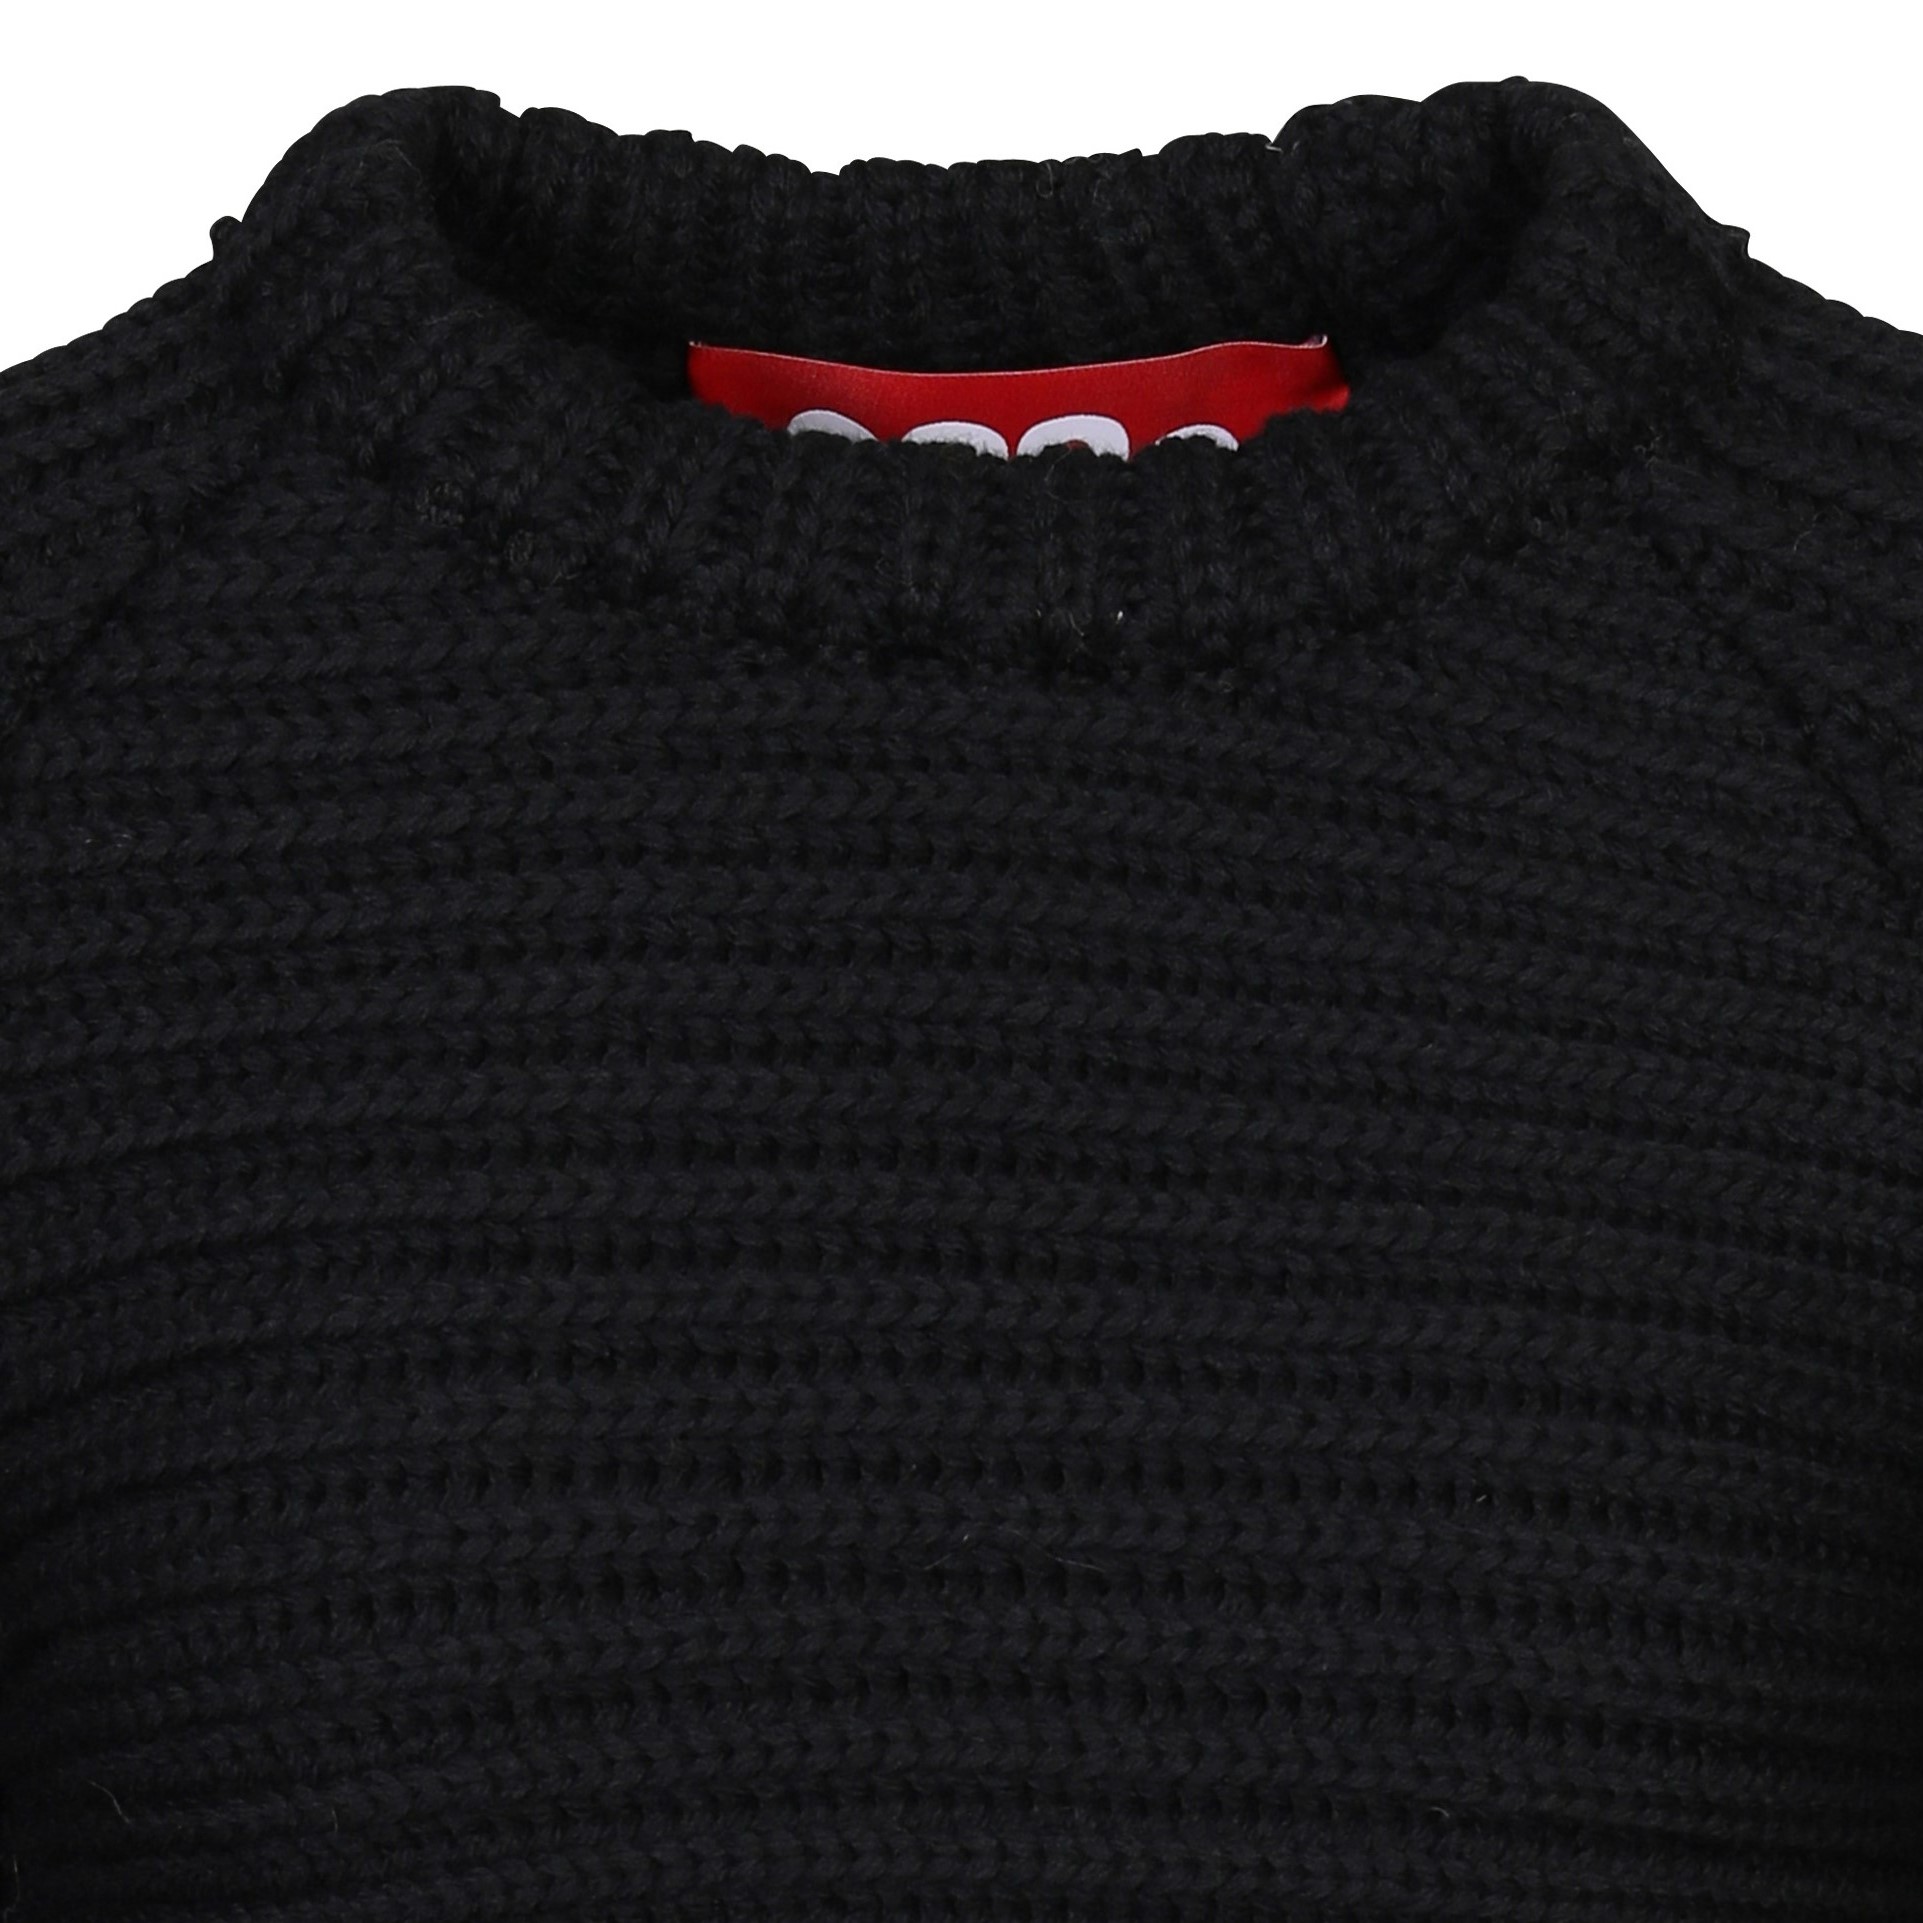 032c Chunky Cropped Knit Pullover in Black